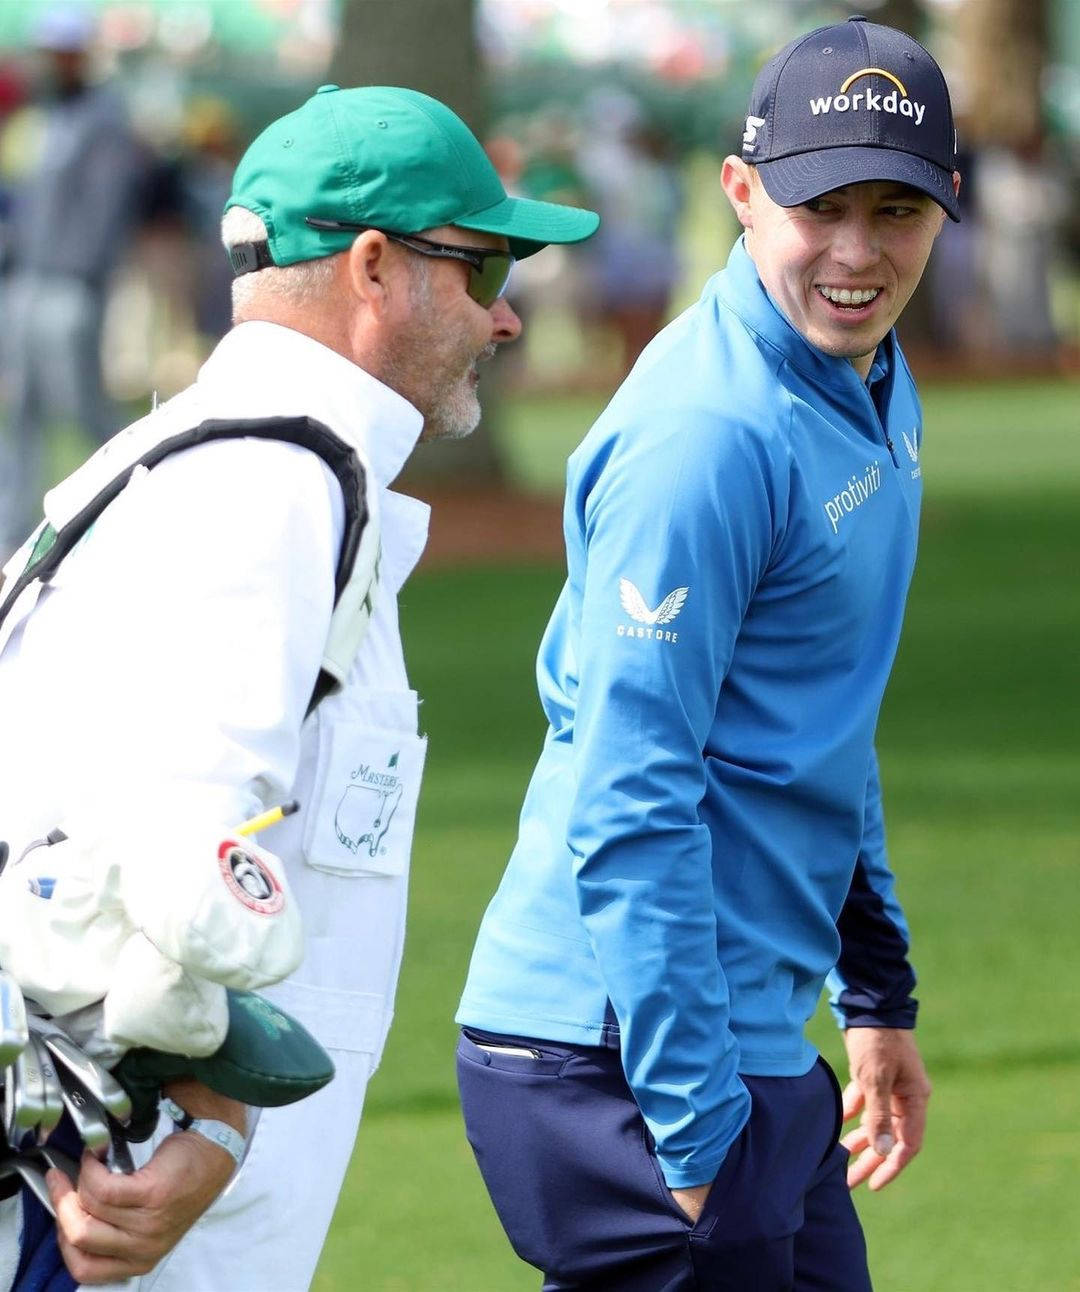 Matt Fitzpatrick and his caddie, Billy Foster on the Golf Course Wallpaper